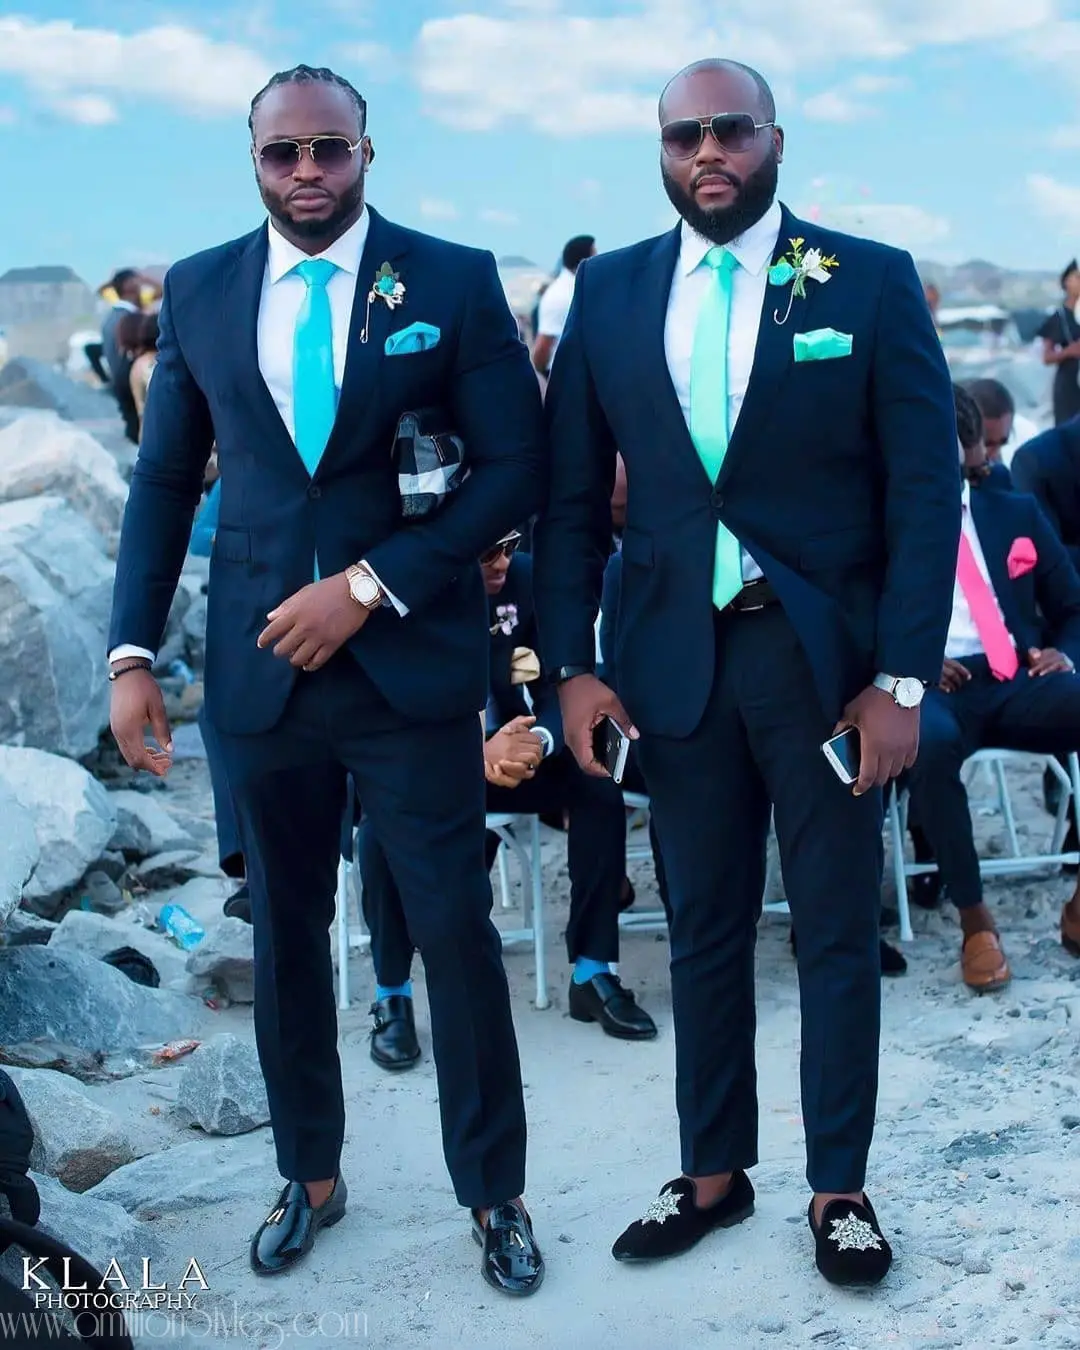 These Nigerian Men In Suit Stole Our Hearts